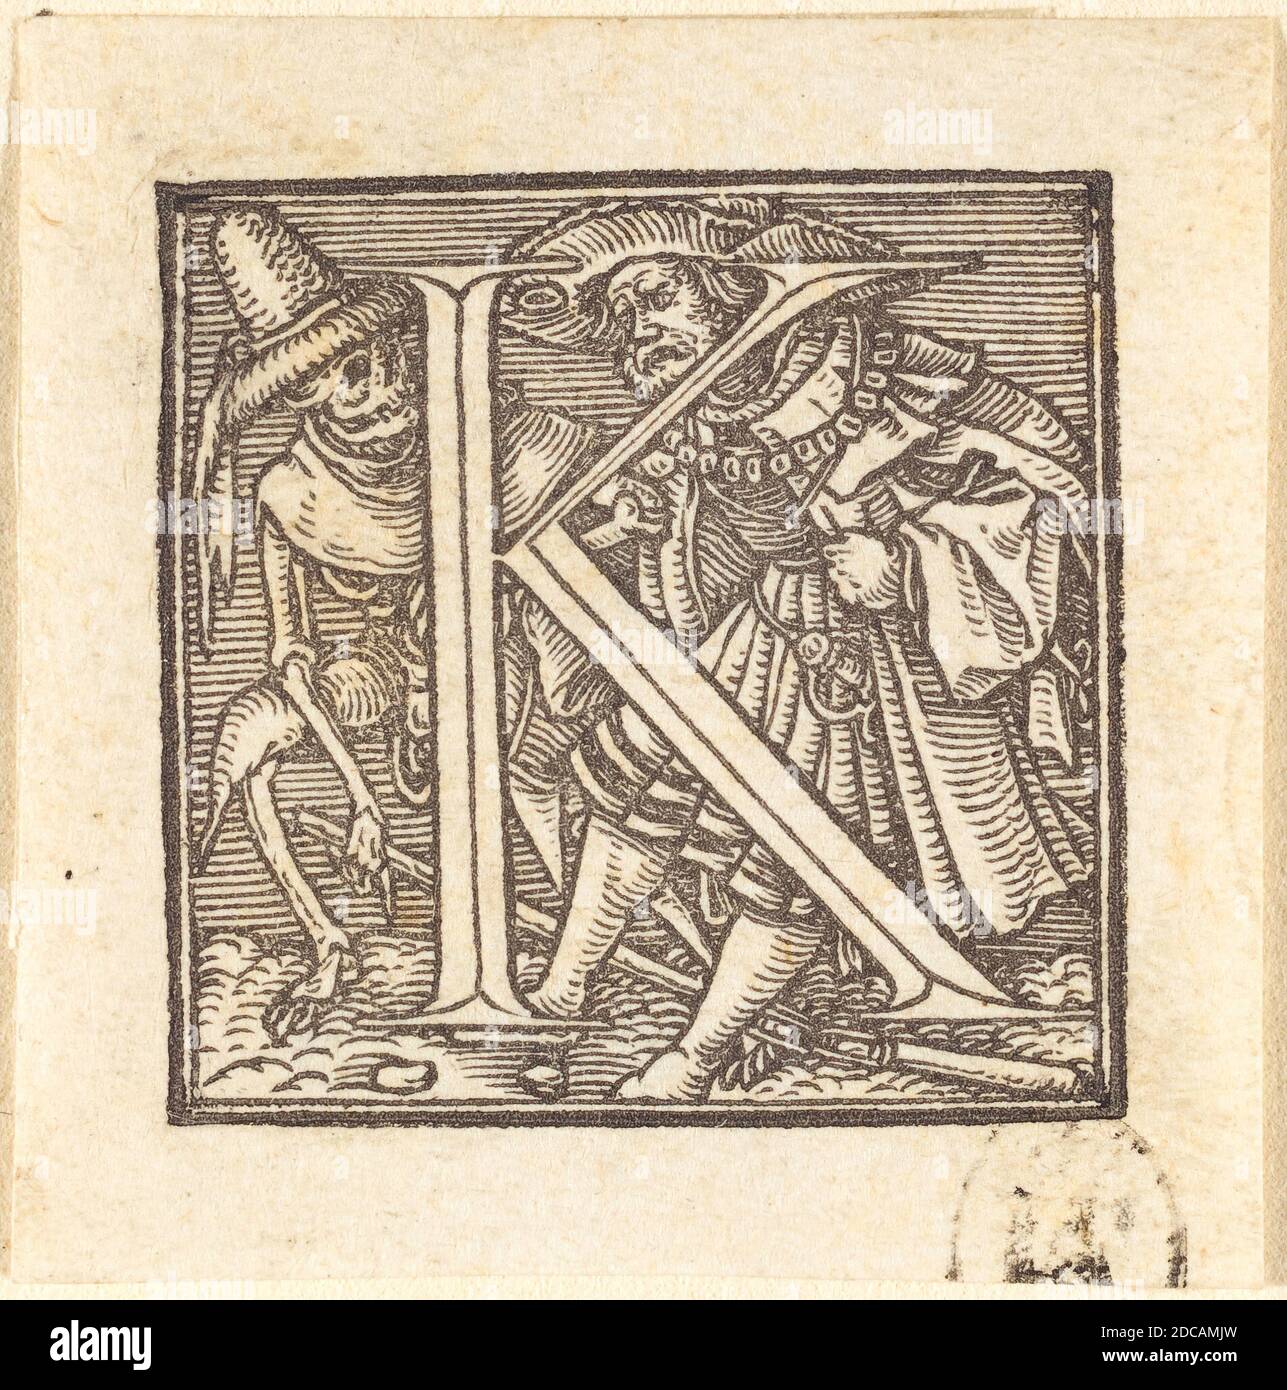 Hans Holbein the Younger, (artist), German, 1497/1498 - 1543, Letter K, Alphabet of Death, (series), woodcut Stock Photo